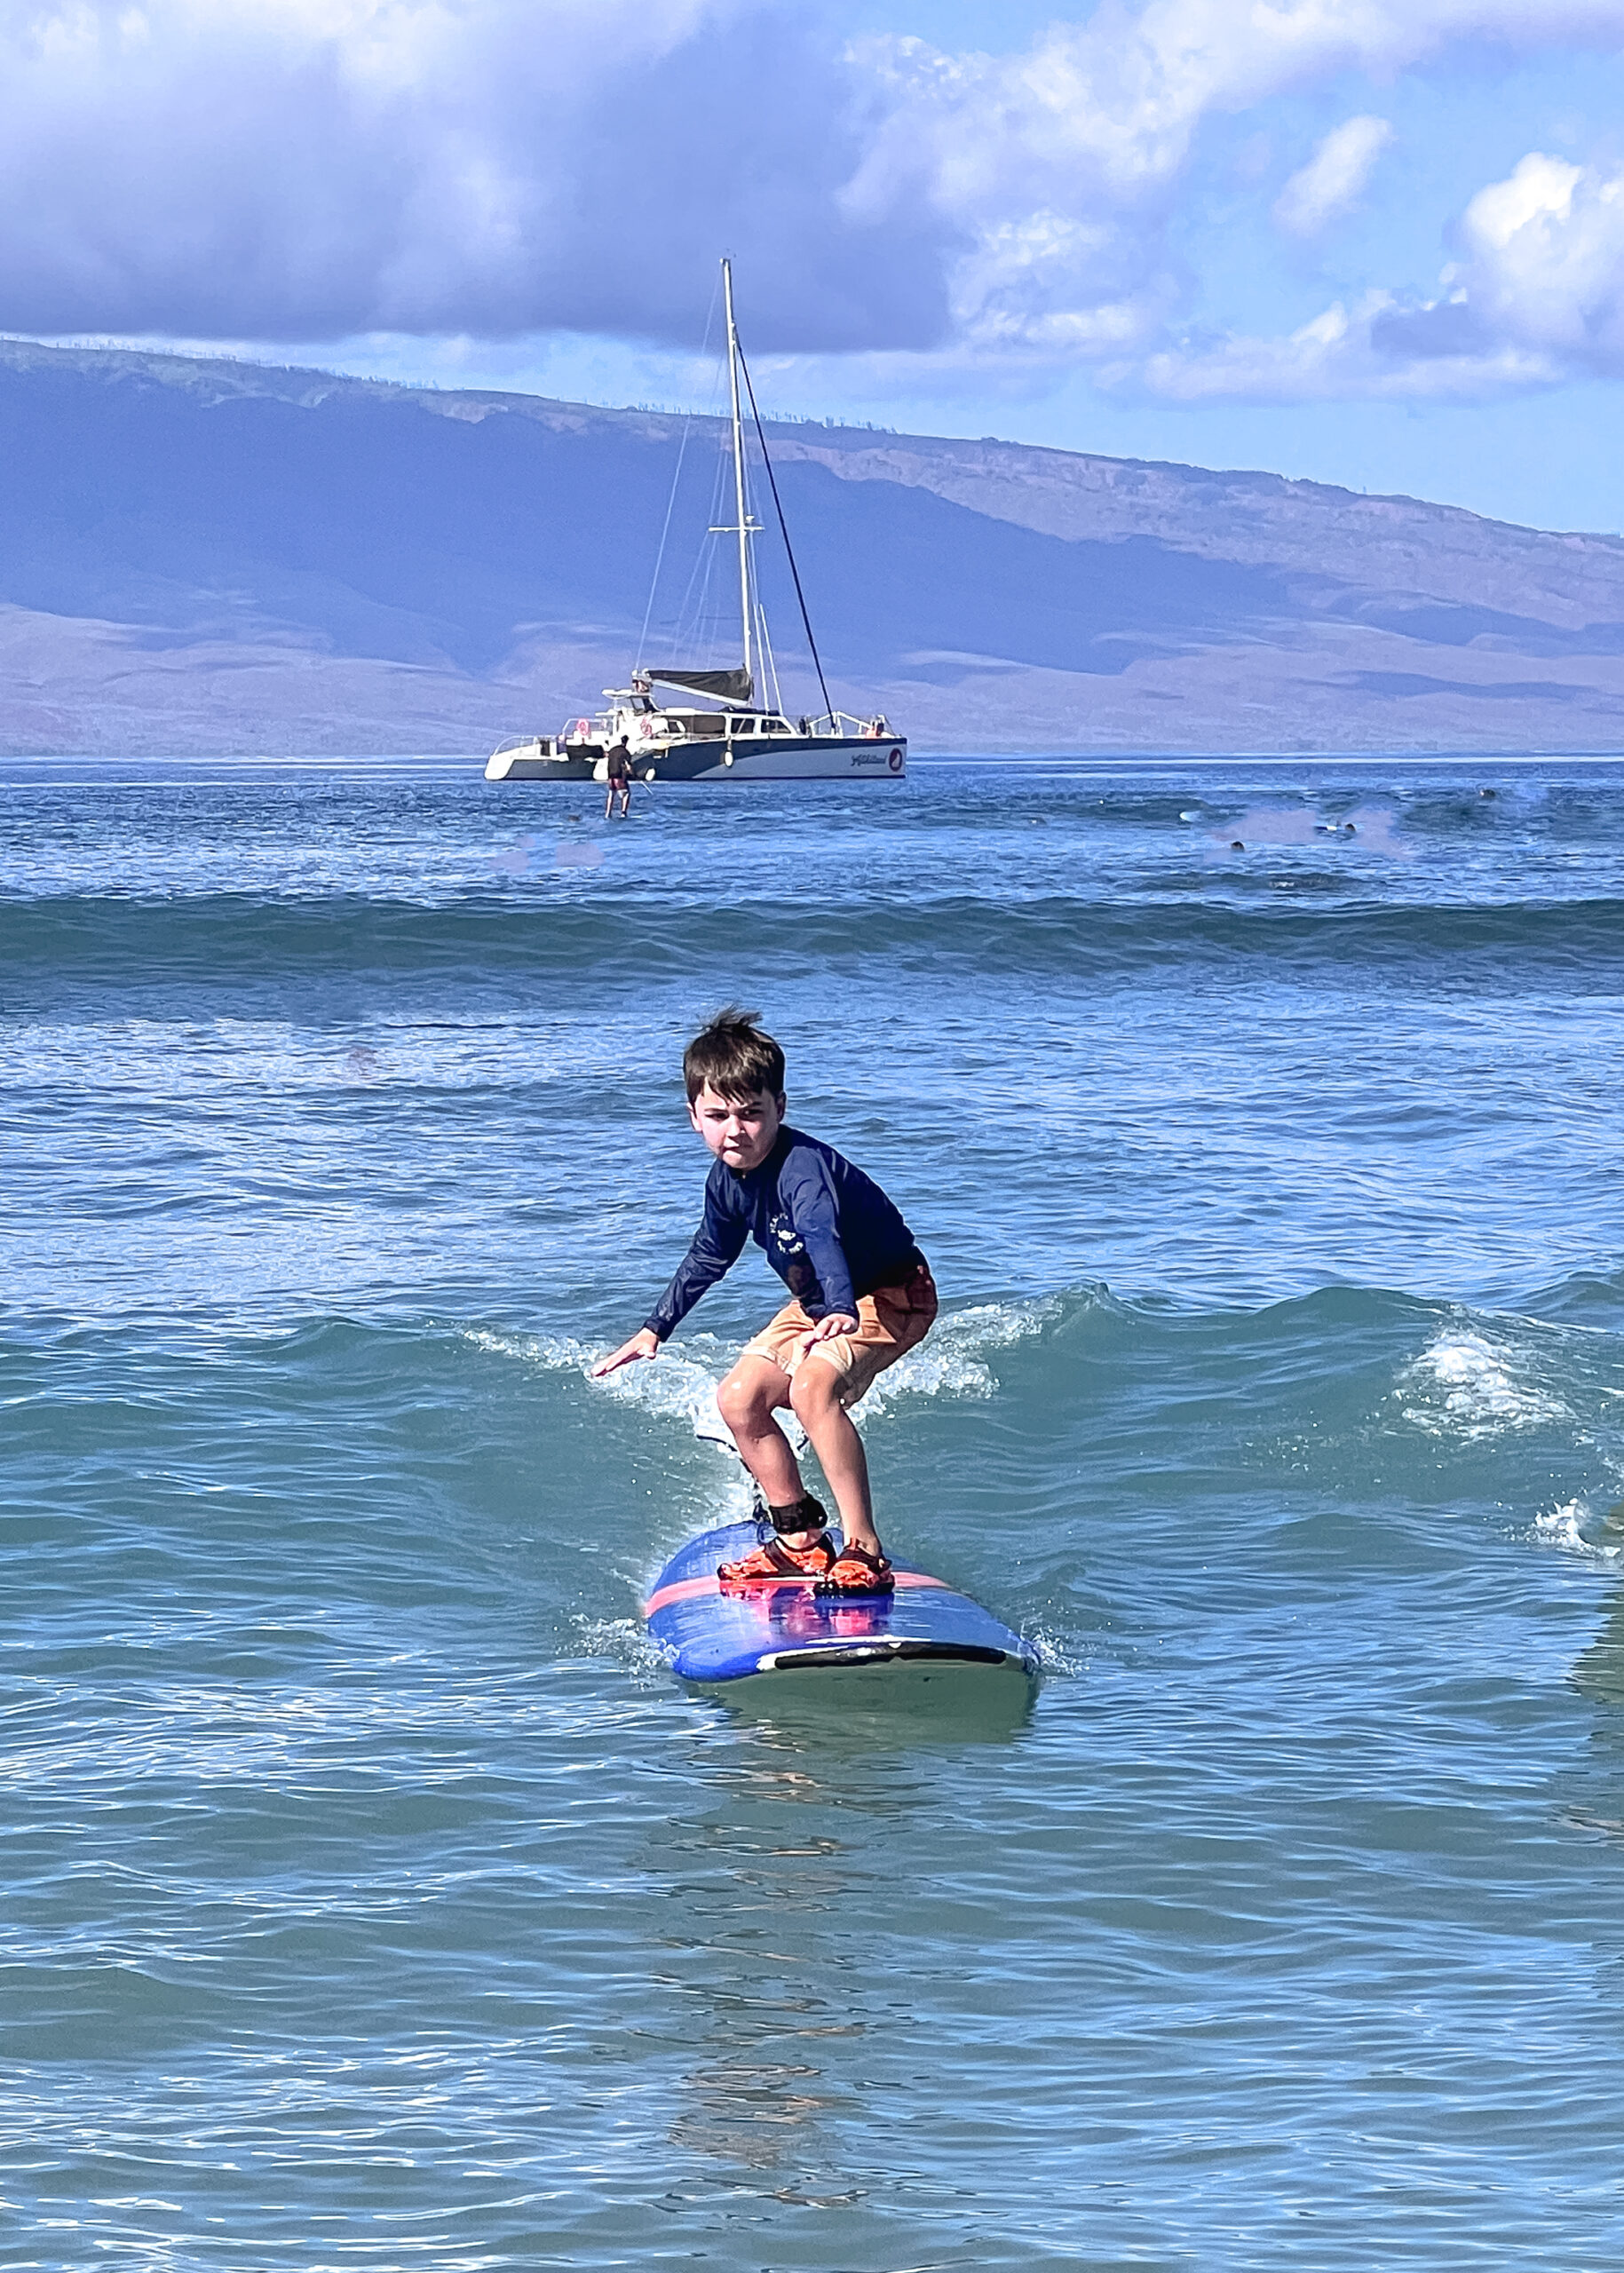 getting up on a surf board for the first time at 7 years old! #theldltravels #surflessons